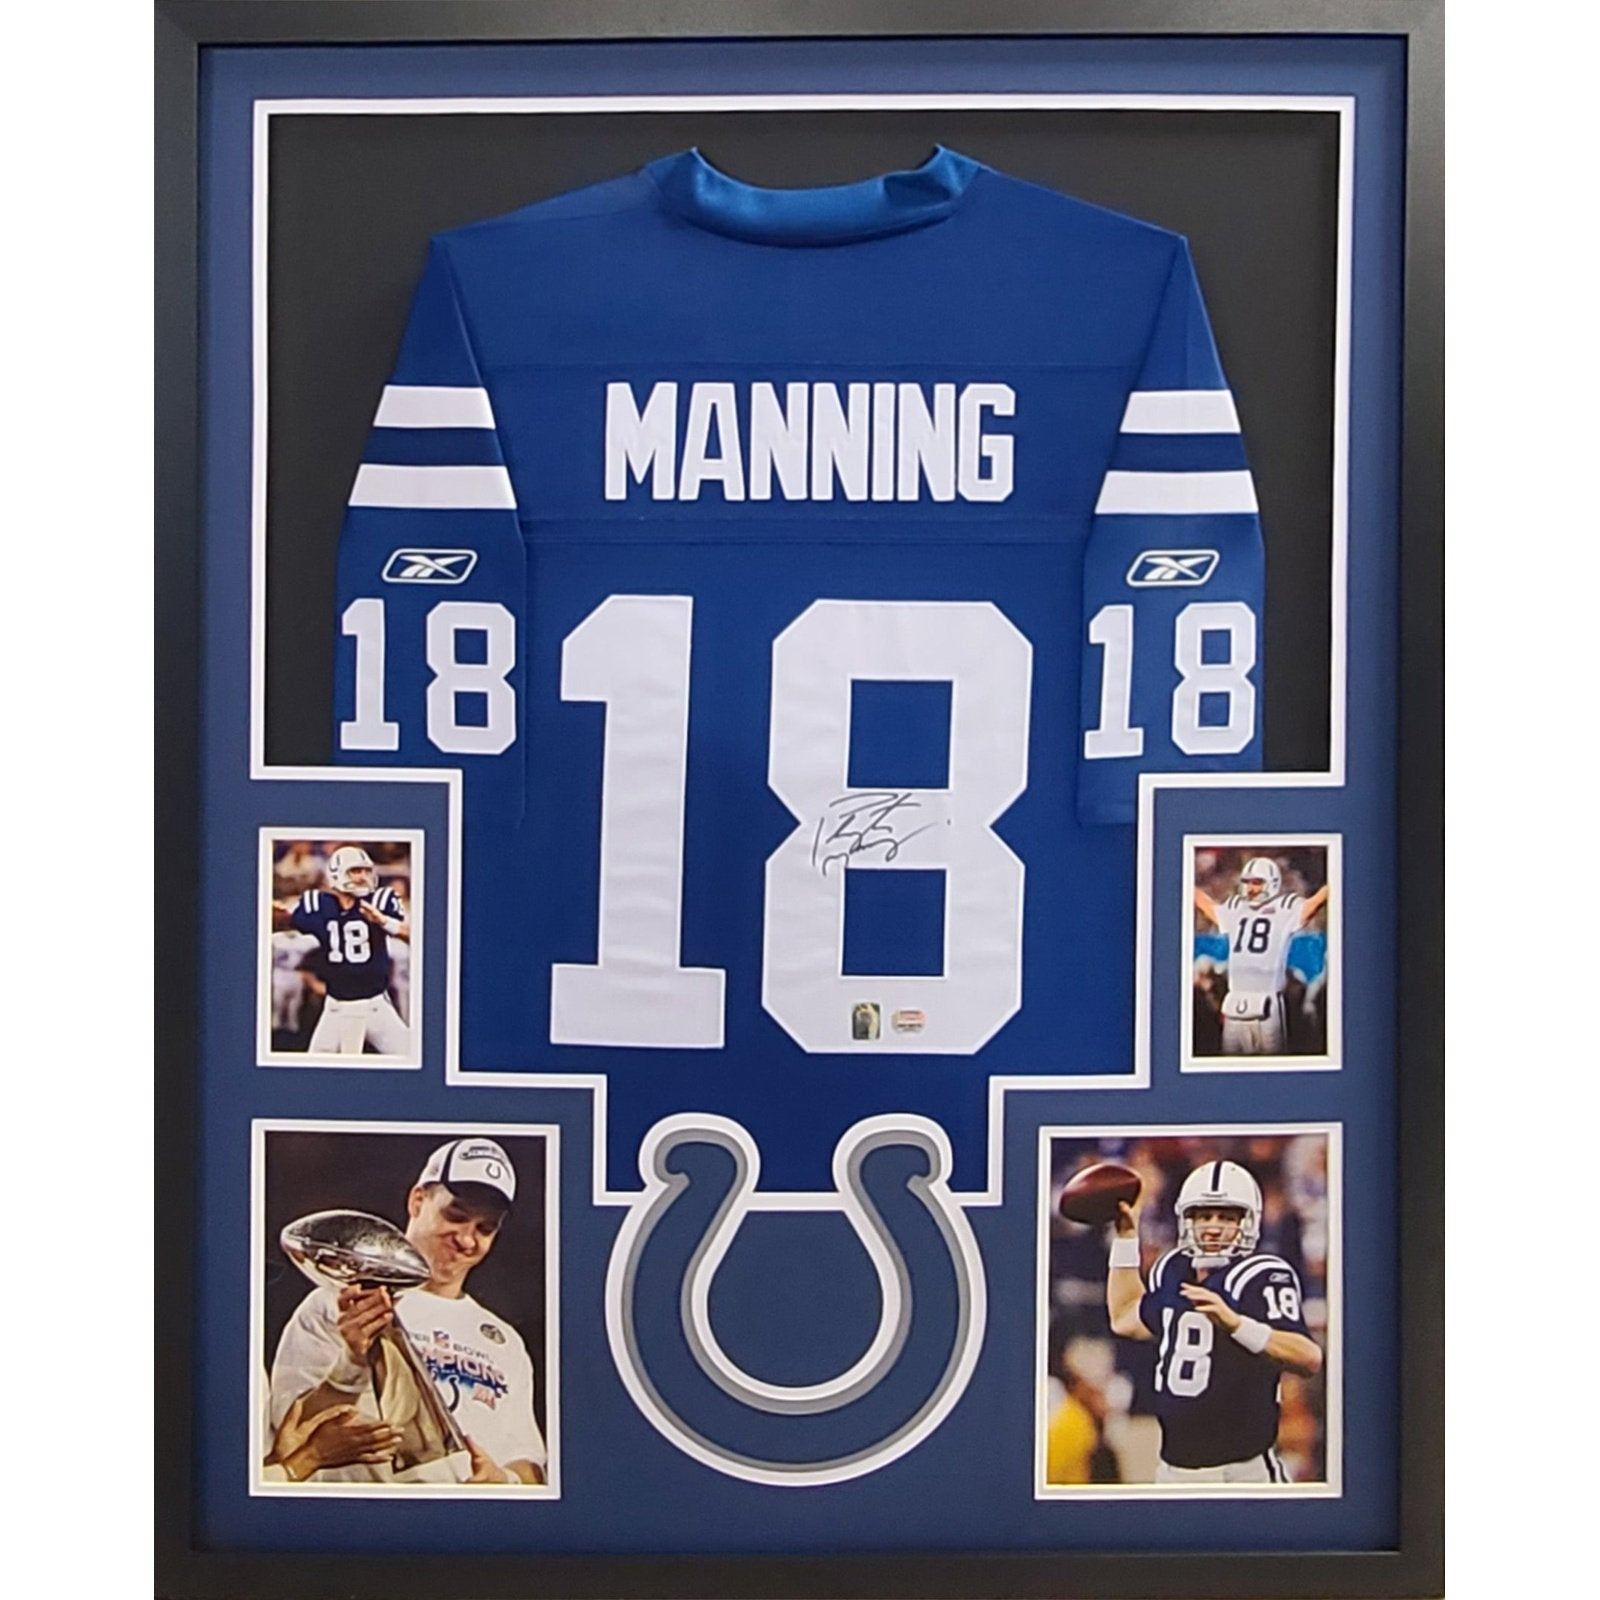 Peyton Manning Framed Jersey Mounted Memories Autographed Signed Colts MM